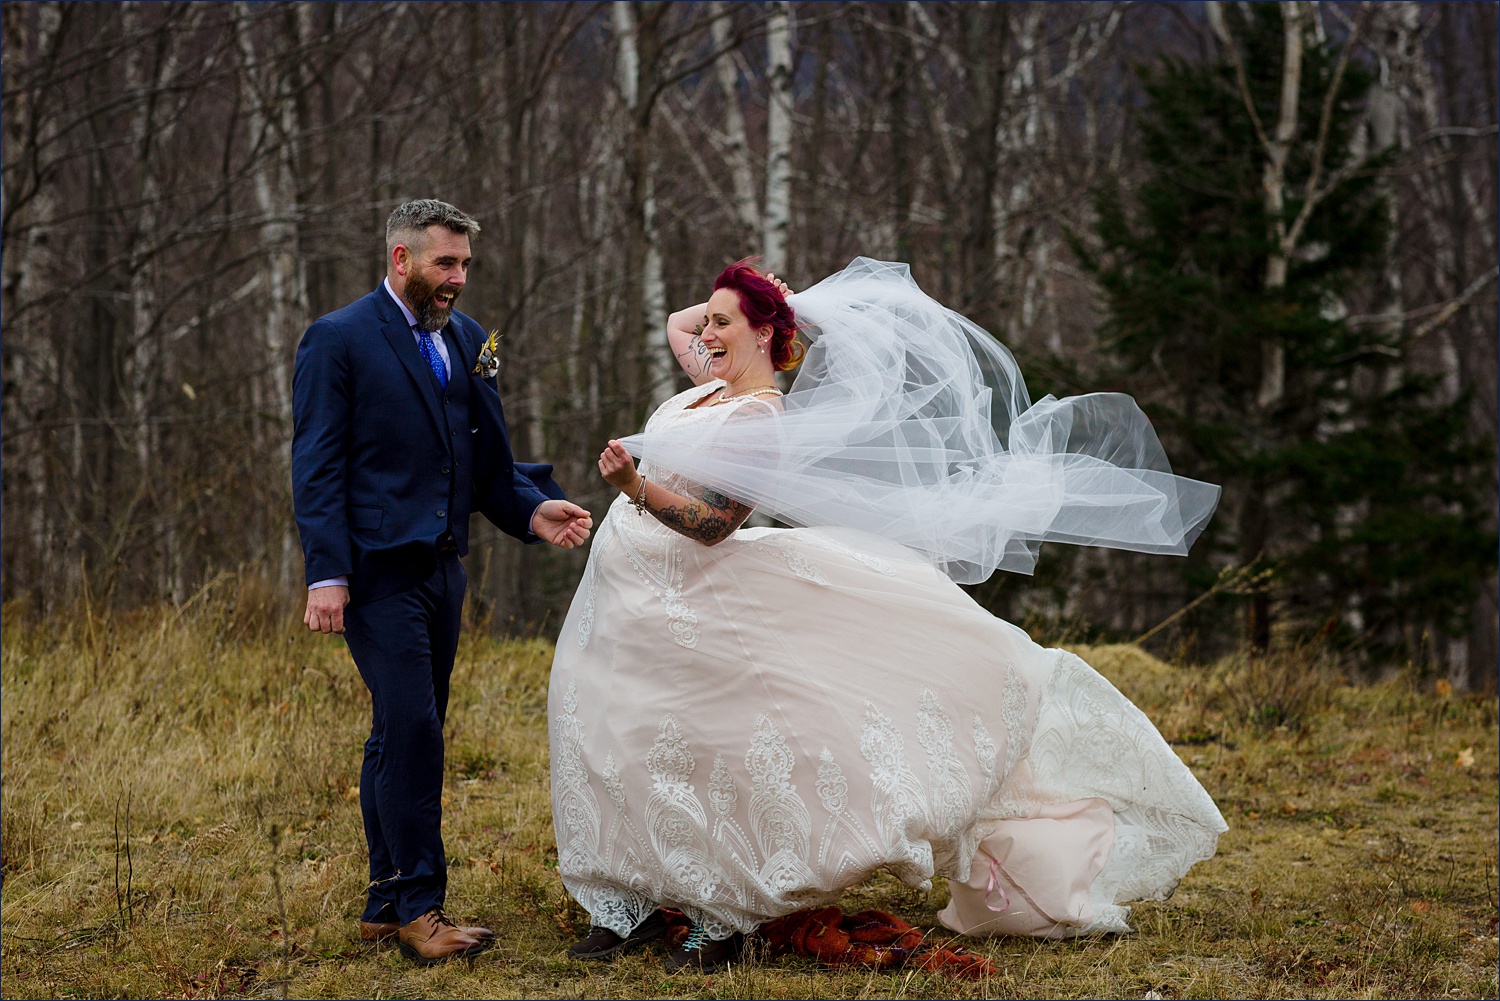 The wind up in the White Mountains threatens to steal away the bride's veil on her wedding day